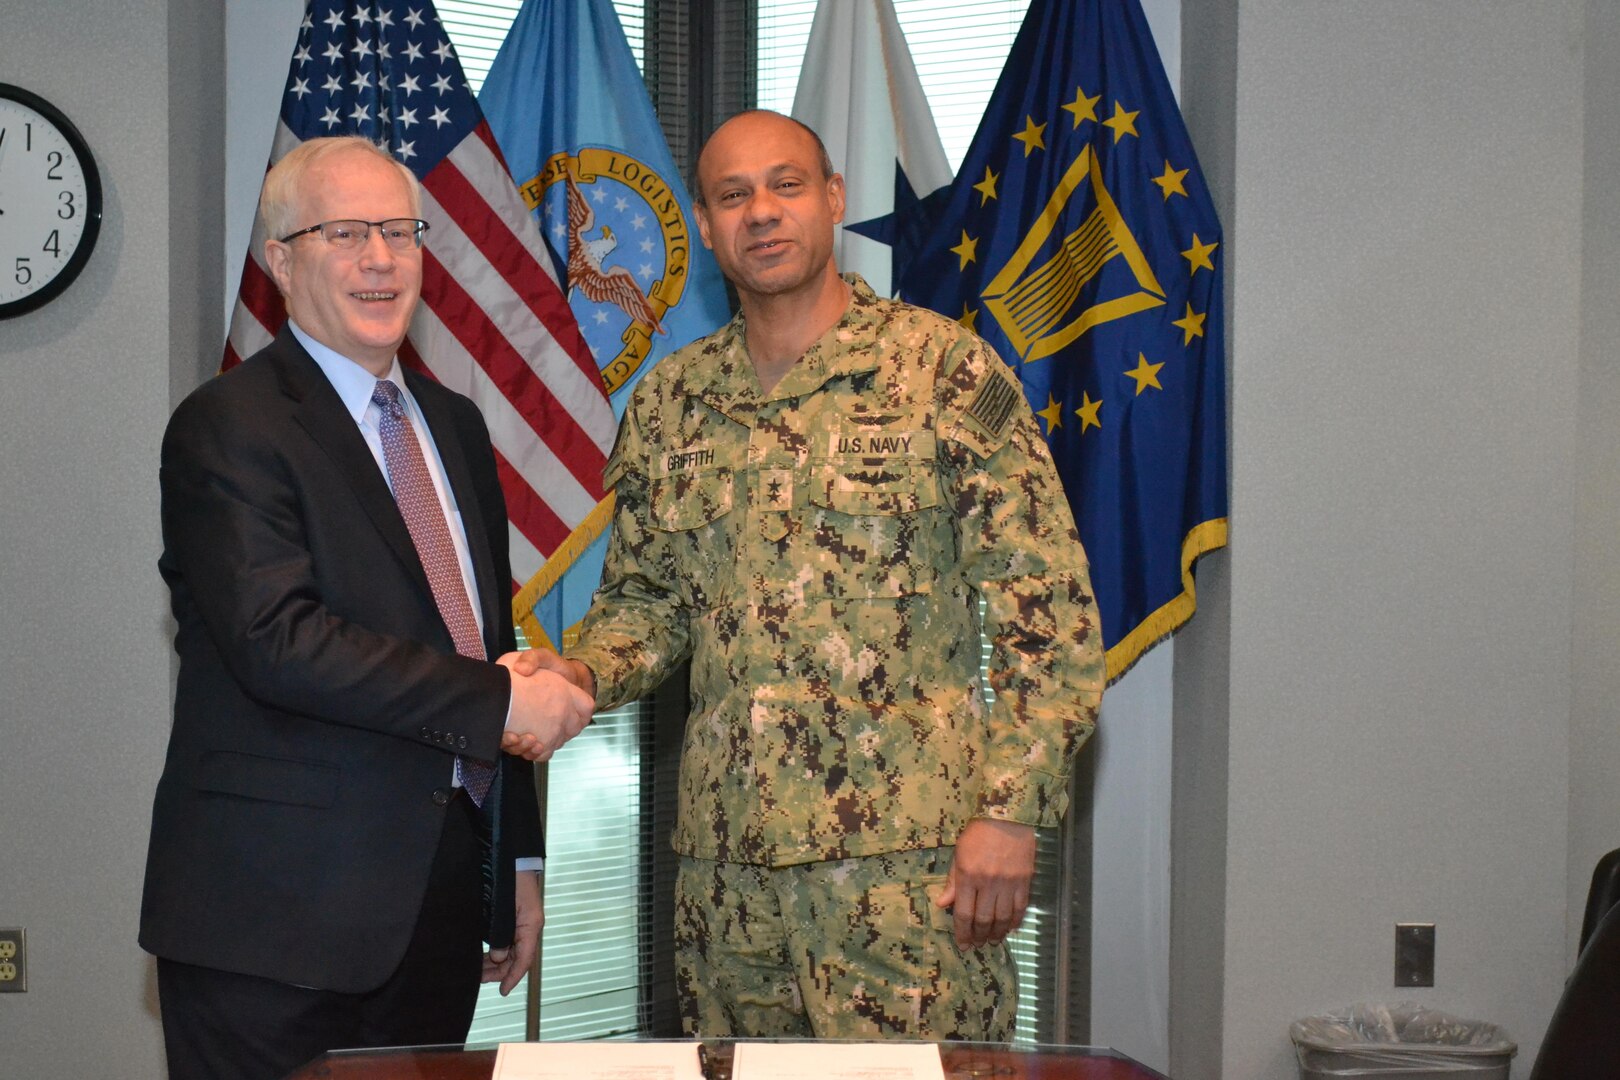 FEMA Assistant Administrator for Logistics Jeffrey Dorko (left) and DLA Logistics Operations Director Rear Adm. Vincent Griffith conclude an interagency agreement March 8 to facilitate DLA's continued support to FEMA during natural disasters.